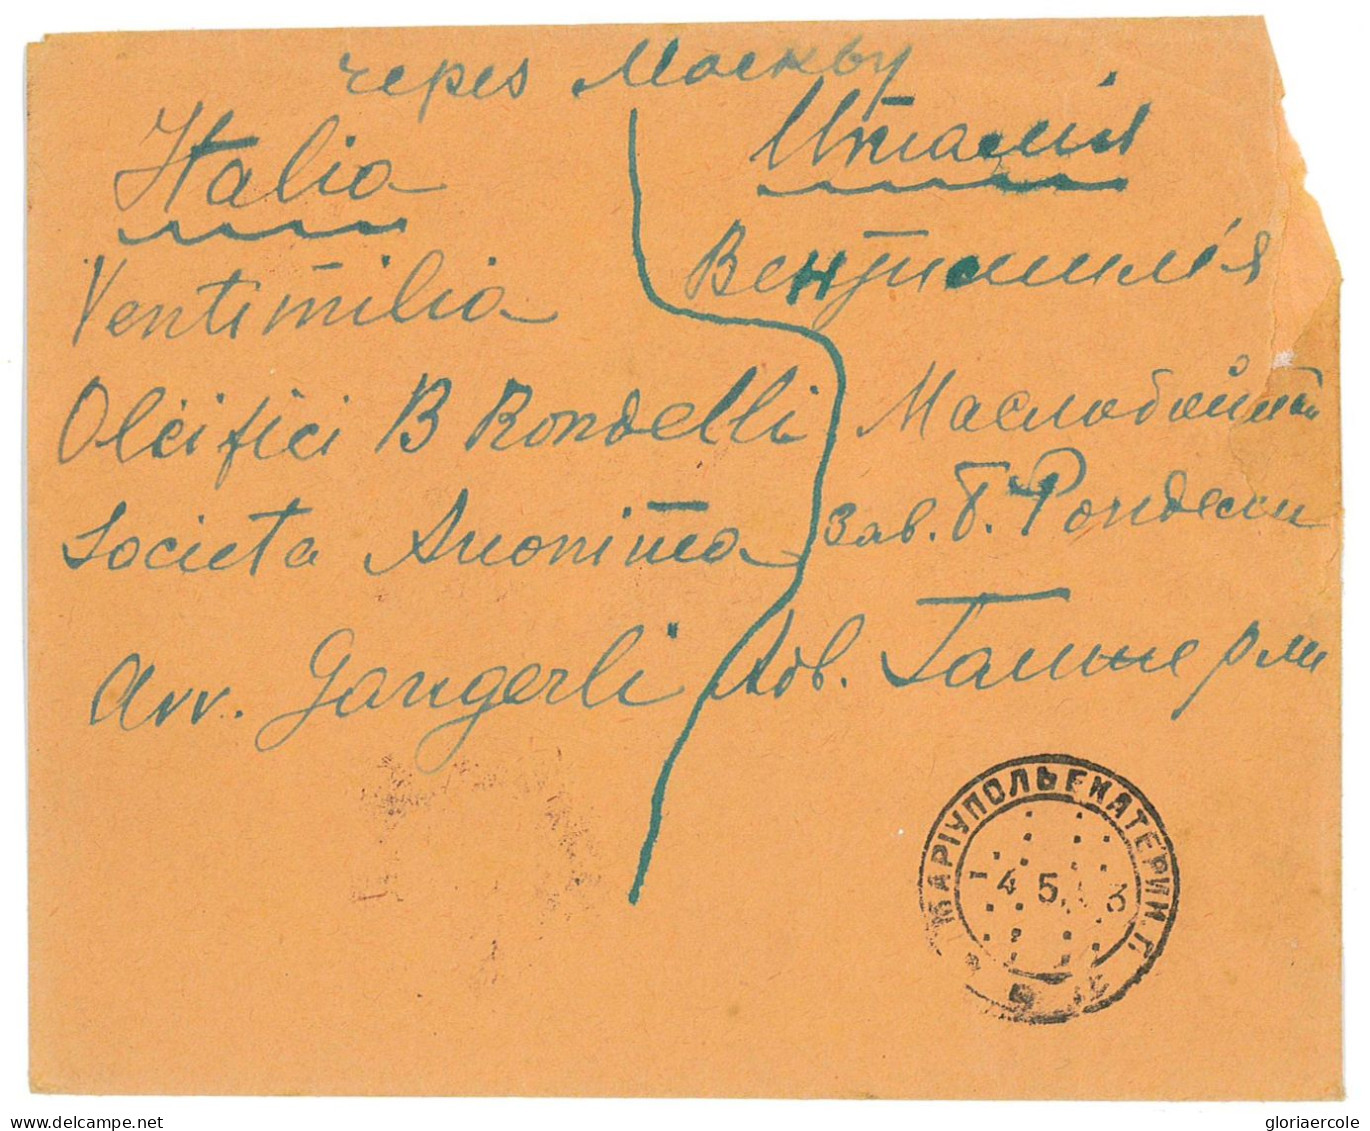 P2914 - RUSSIA , NICE FRESH COVER MIXED FRANKING. 650 RUBEL RATE TO ITALY - Briefe U. Dokumente